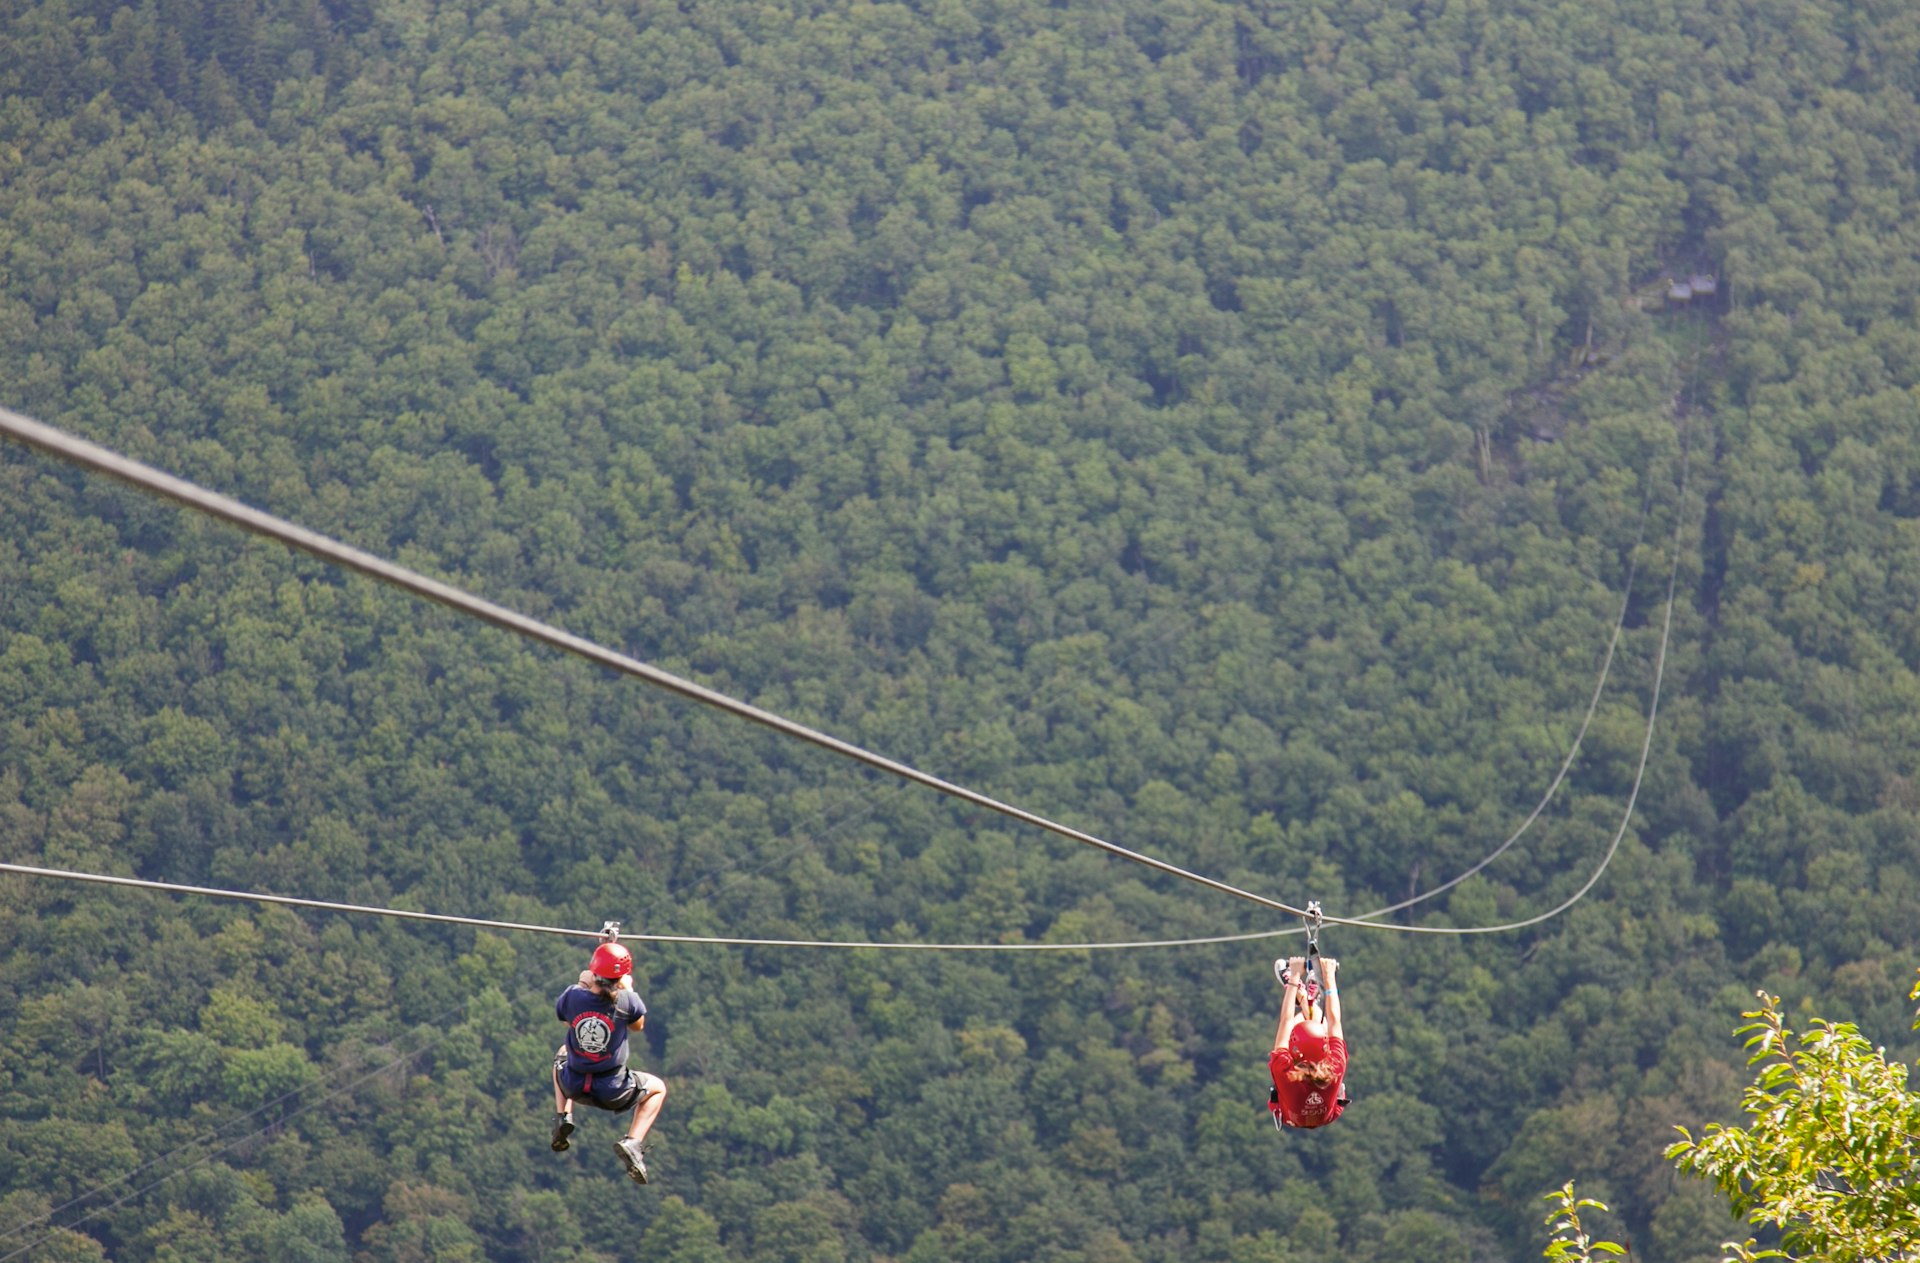 Visitors zip lining in the Catskill mountains at the Hunter Mountain Ski Resort.